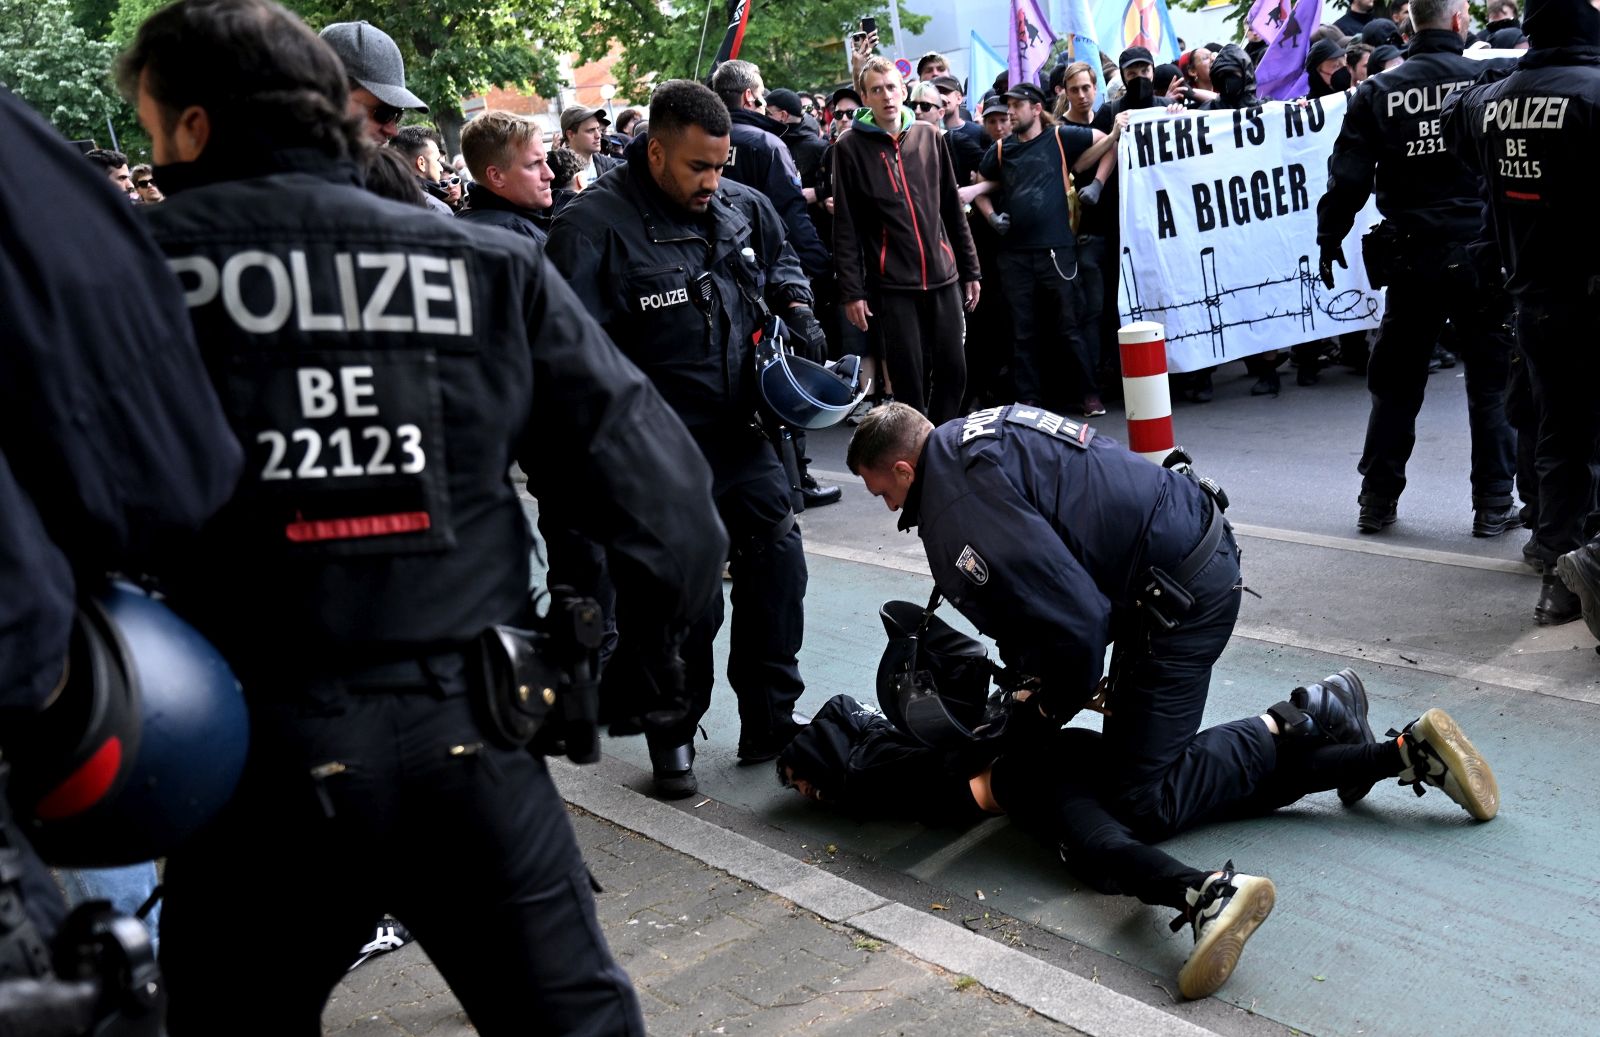 epa10665338 Police arrest a participant of a left wing protest held in solidarity with Lina E. in Berlin, Germany, 31 May 2023. A court in Dresden has sentenced a 28-year-old woman knows as Lina E. to five years and three months in prison for taking part in a series of attacks on neo-Nazis and other right-wing extremists over a period of two years.  EPA/FILIP SINGER